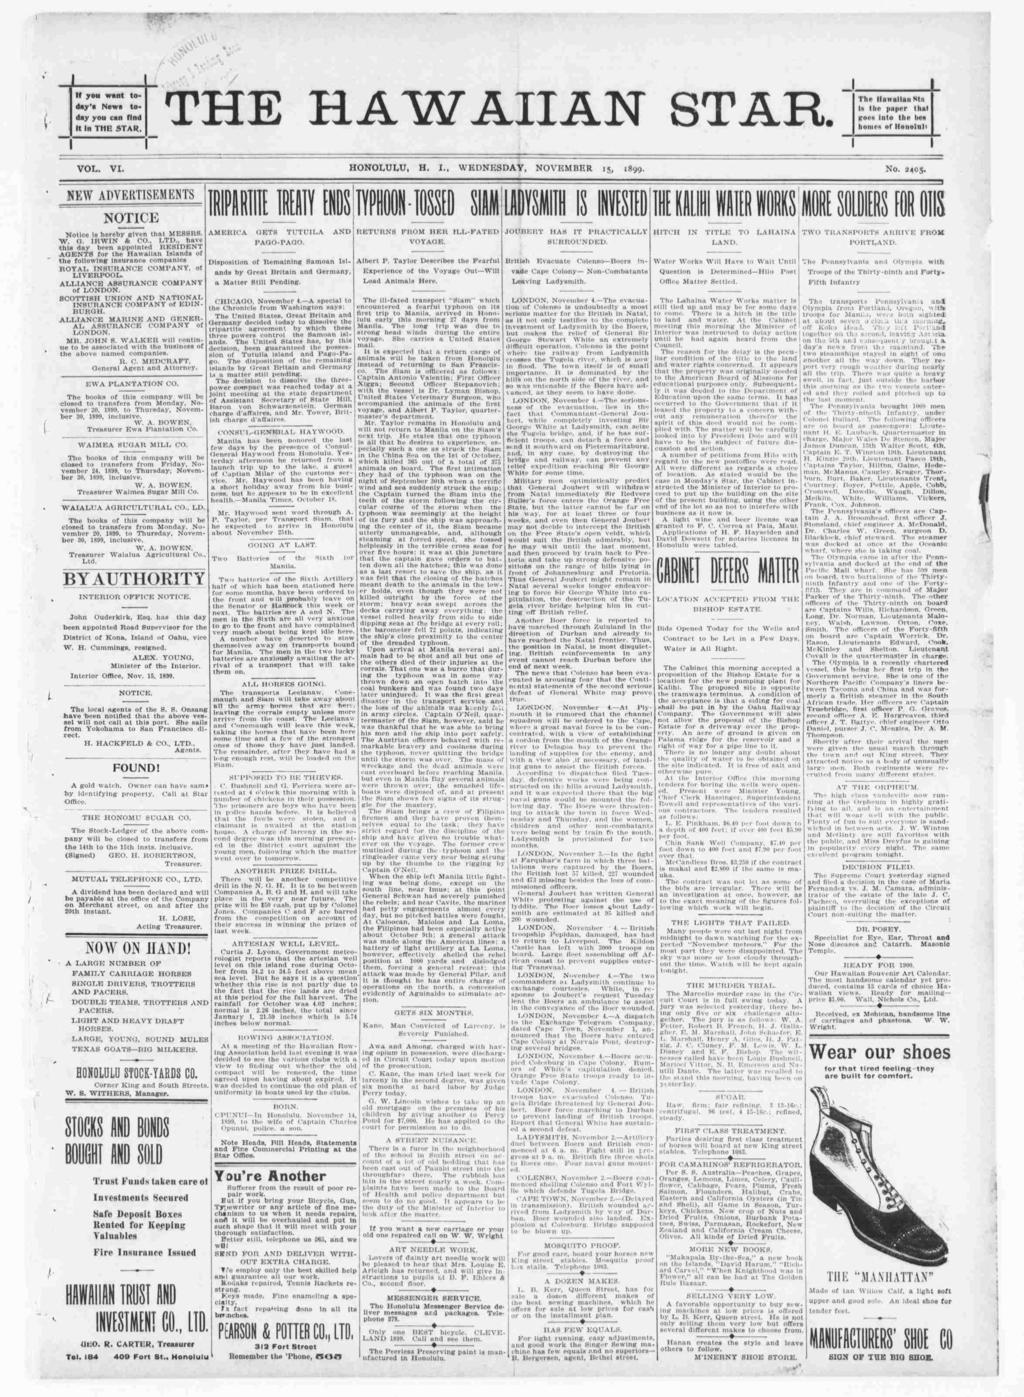 " f you wa today's News today you can fnd t n THE STAR. J The HwnllnnStn s the pnper that goes o tho les homes orononl l V l t. r : VOL. V. HONOLULU, H.., WEDNESDAY, NOVEMBER 15., 1899. No. 2405.